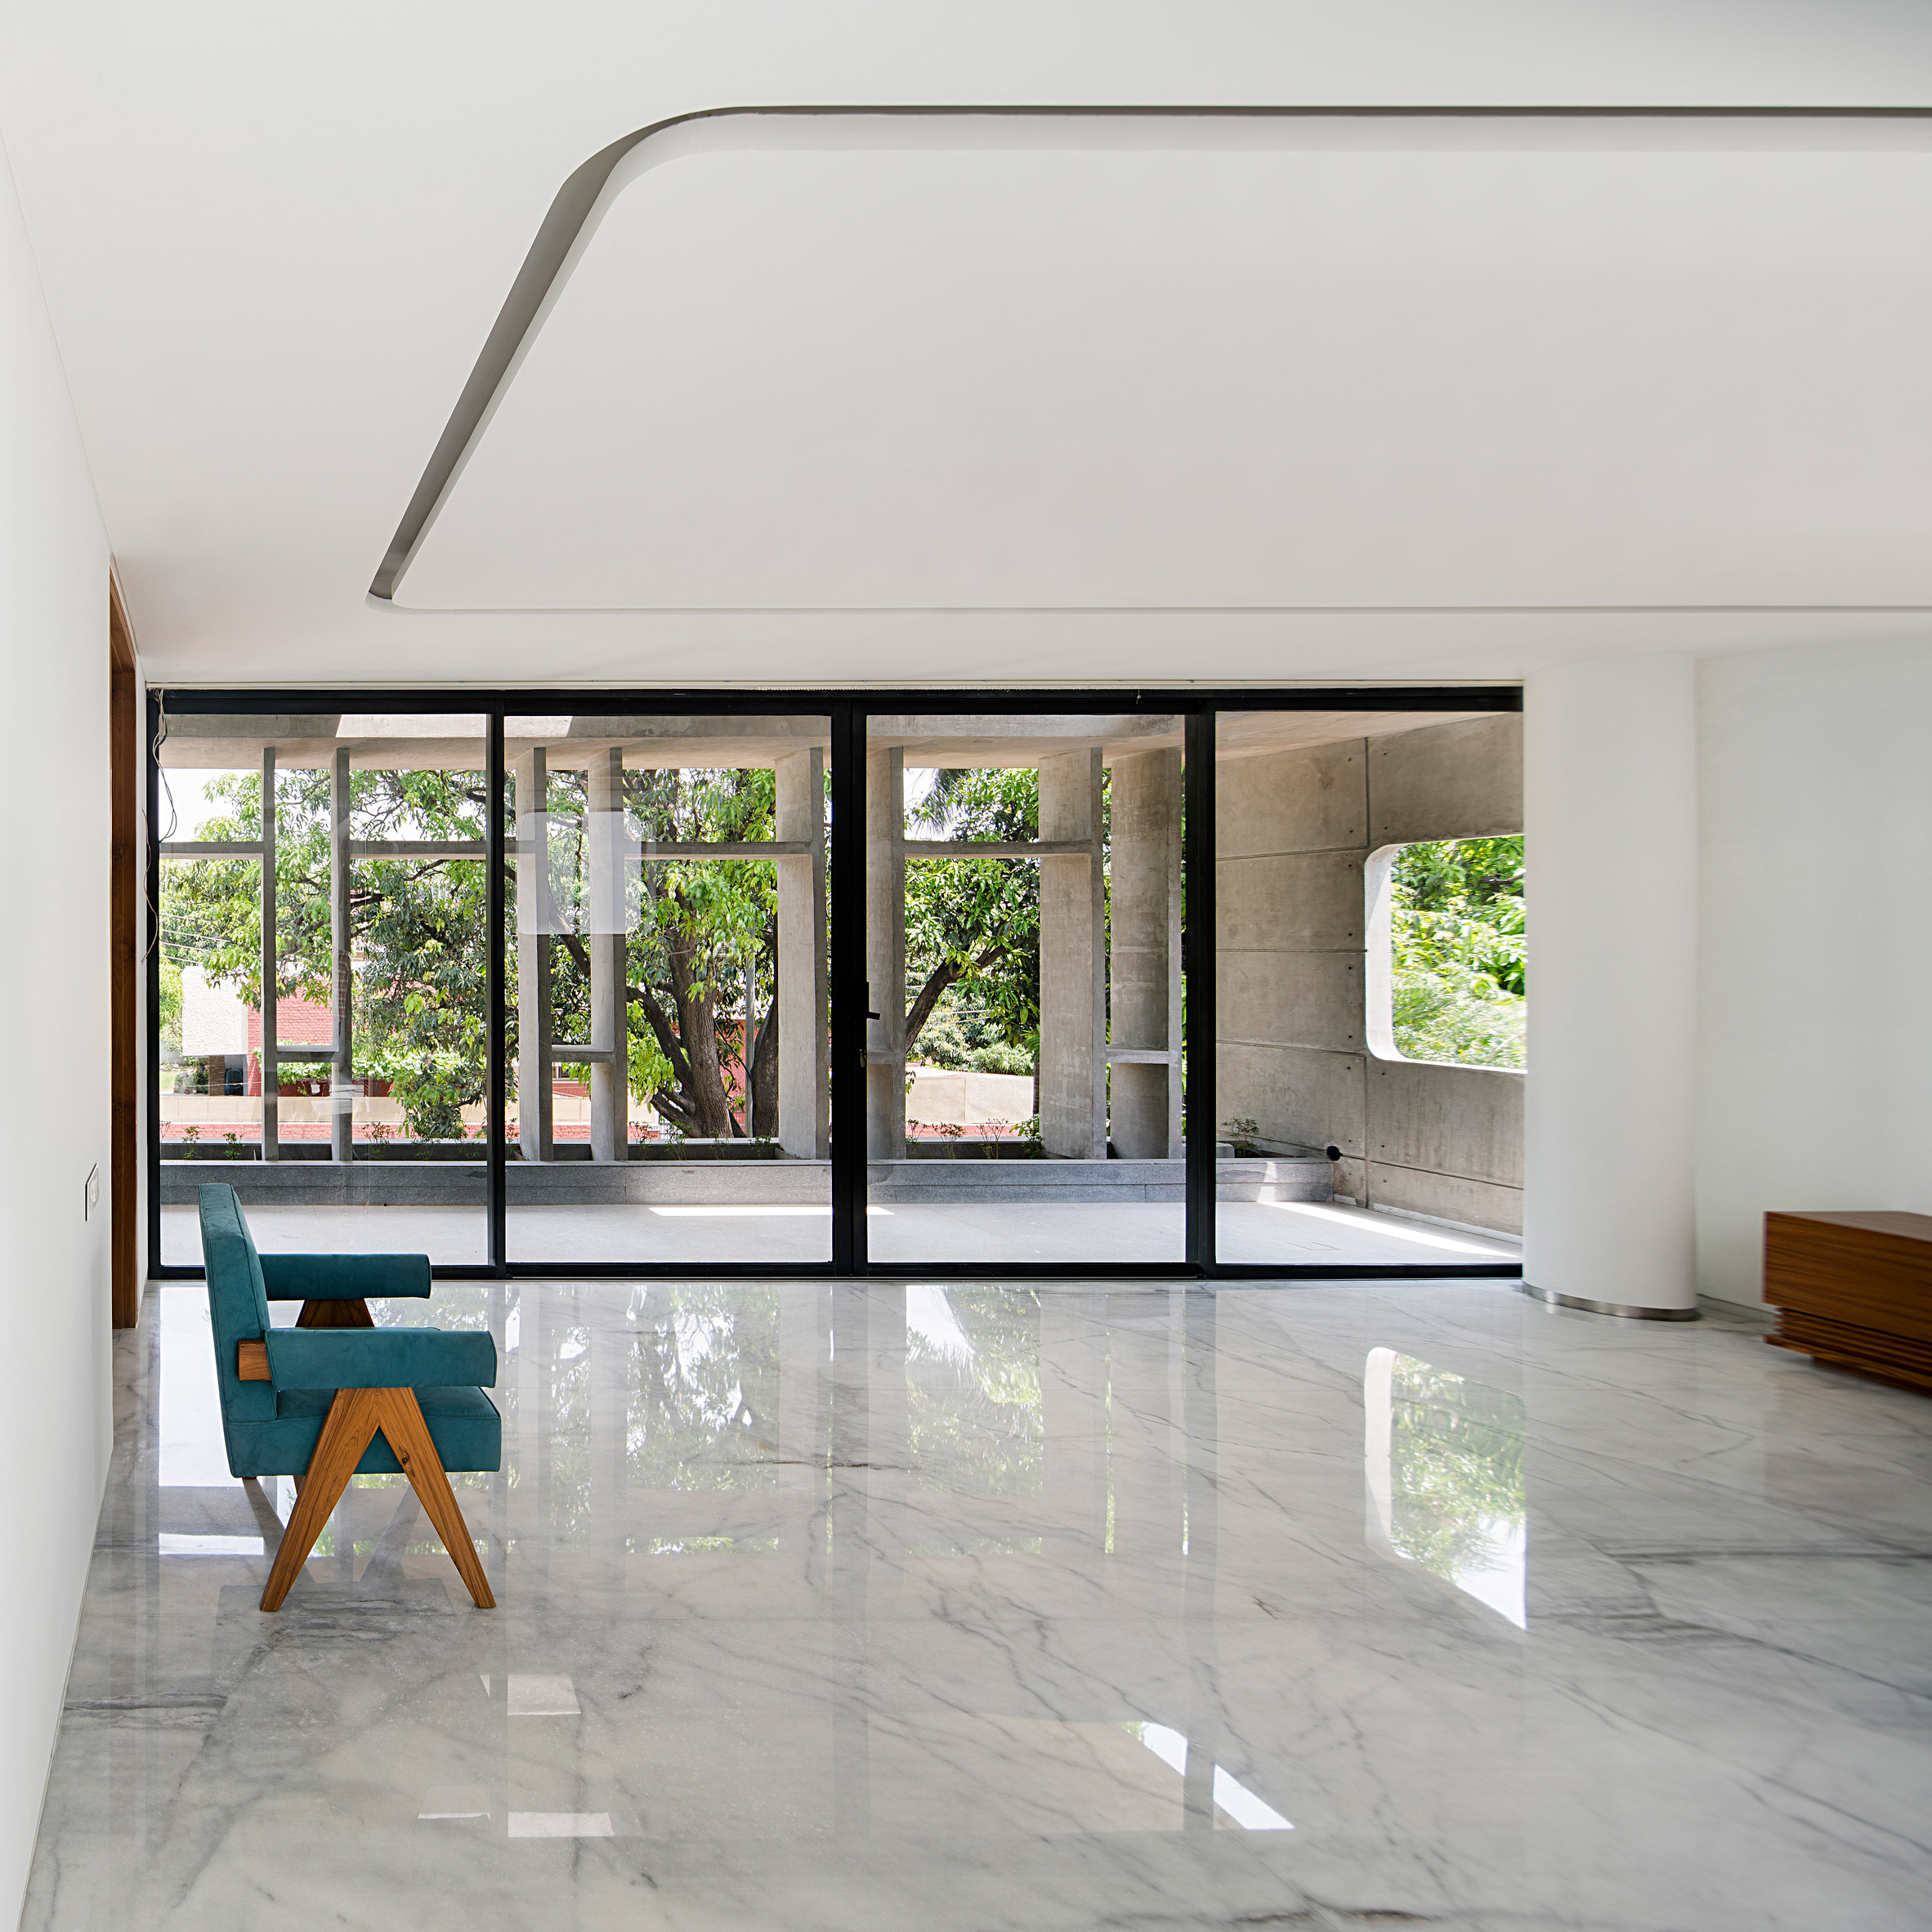 https://static.dezeen.com/uploads/2020/03/residence-1065-charged-voids-house-india-architecture_dezeen_2364_col_13.jpg